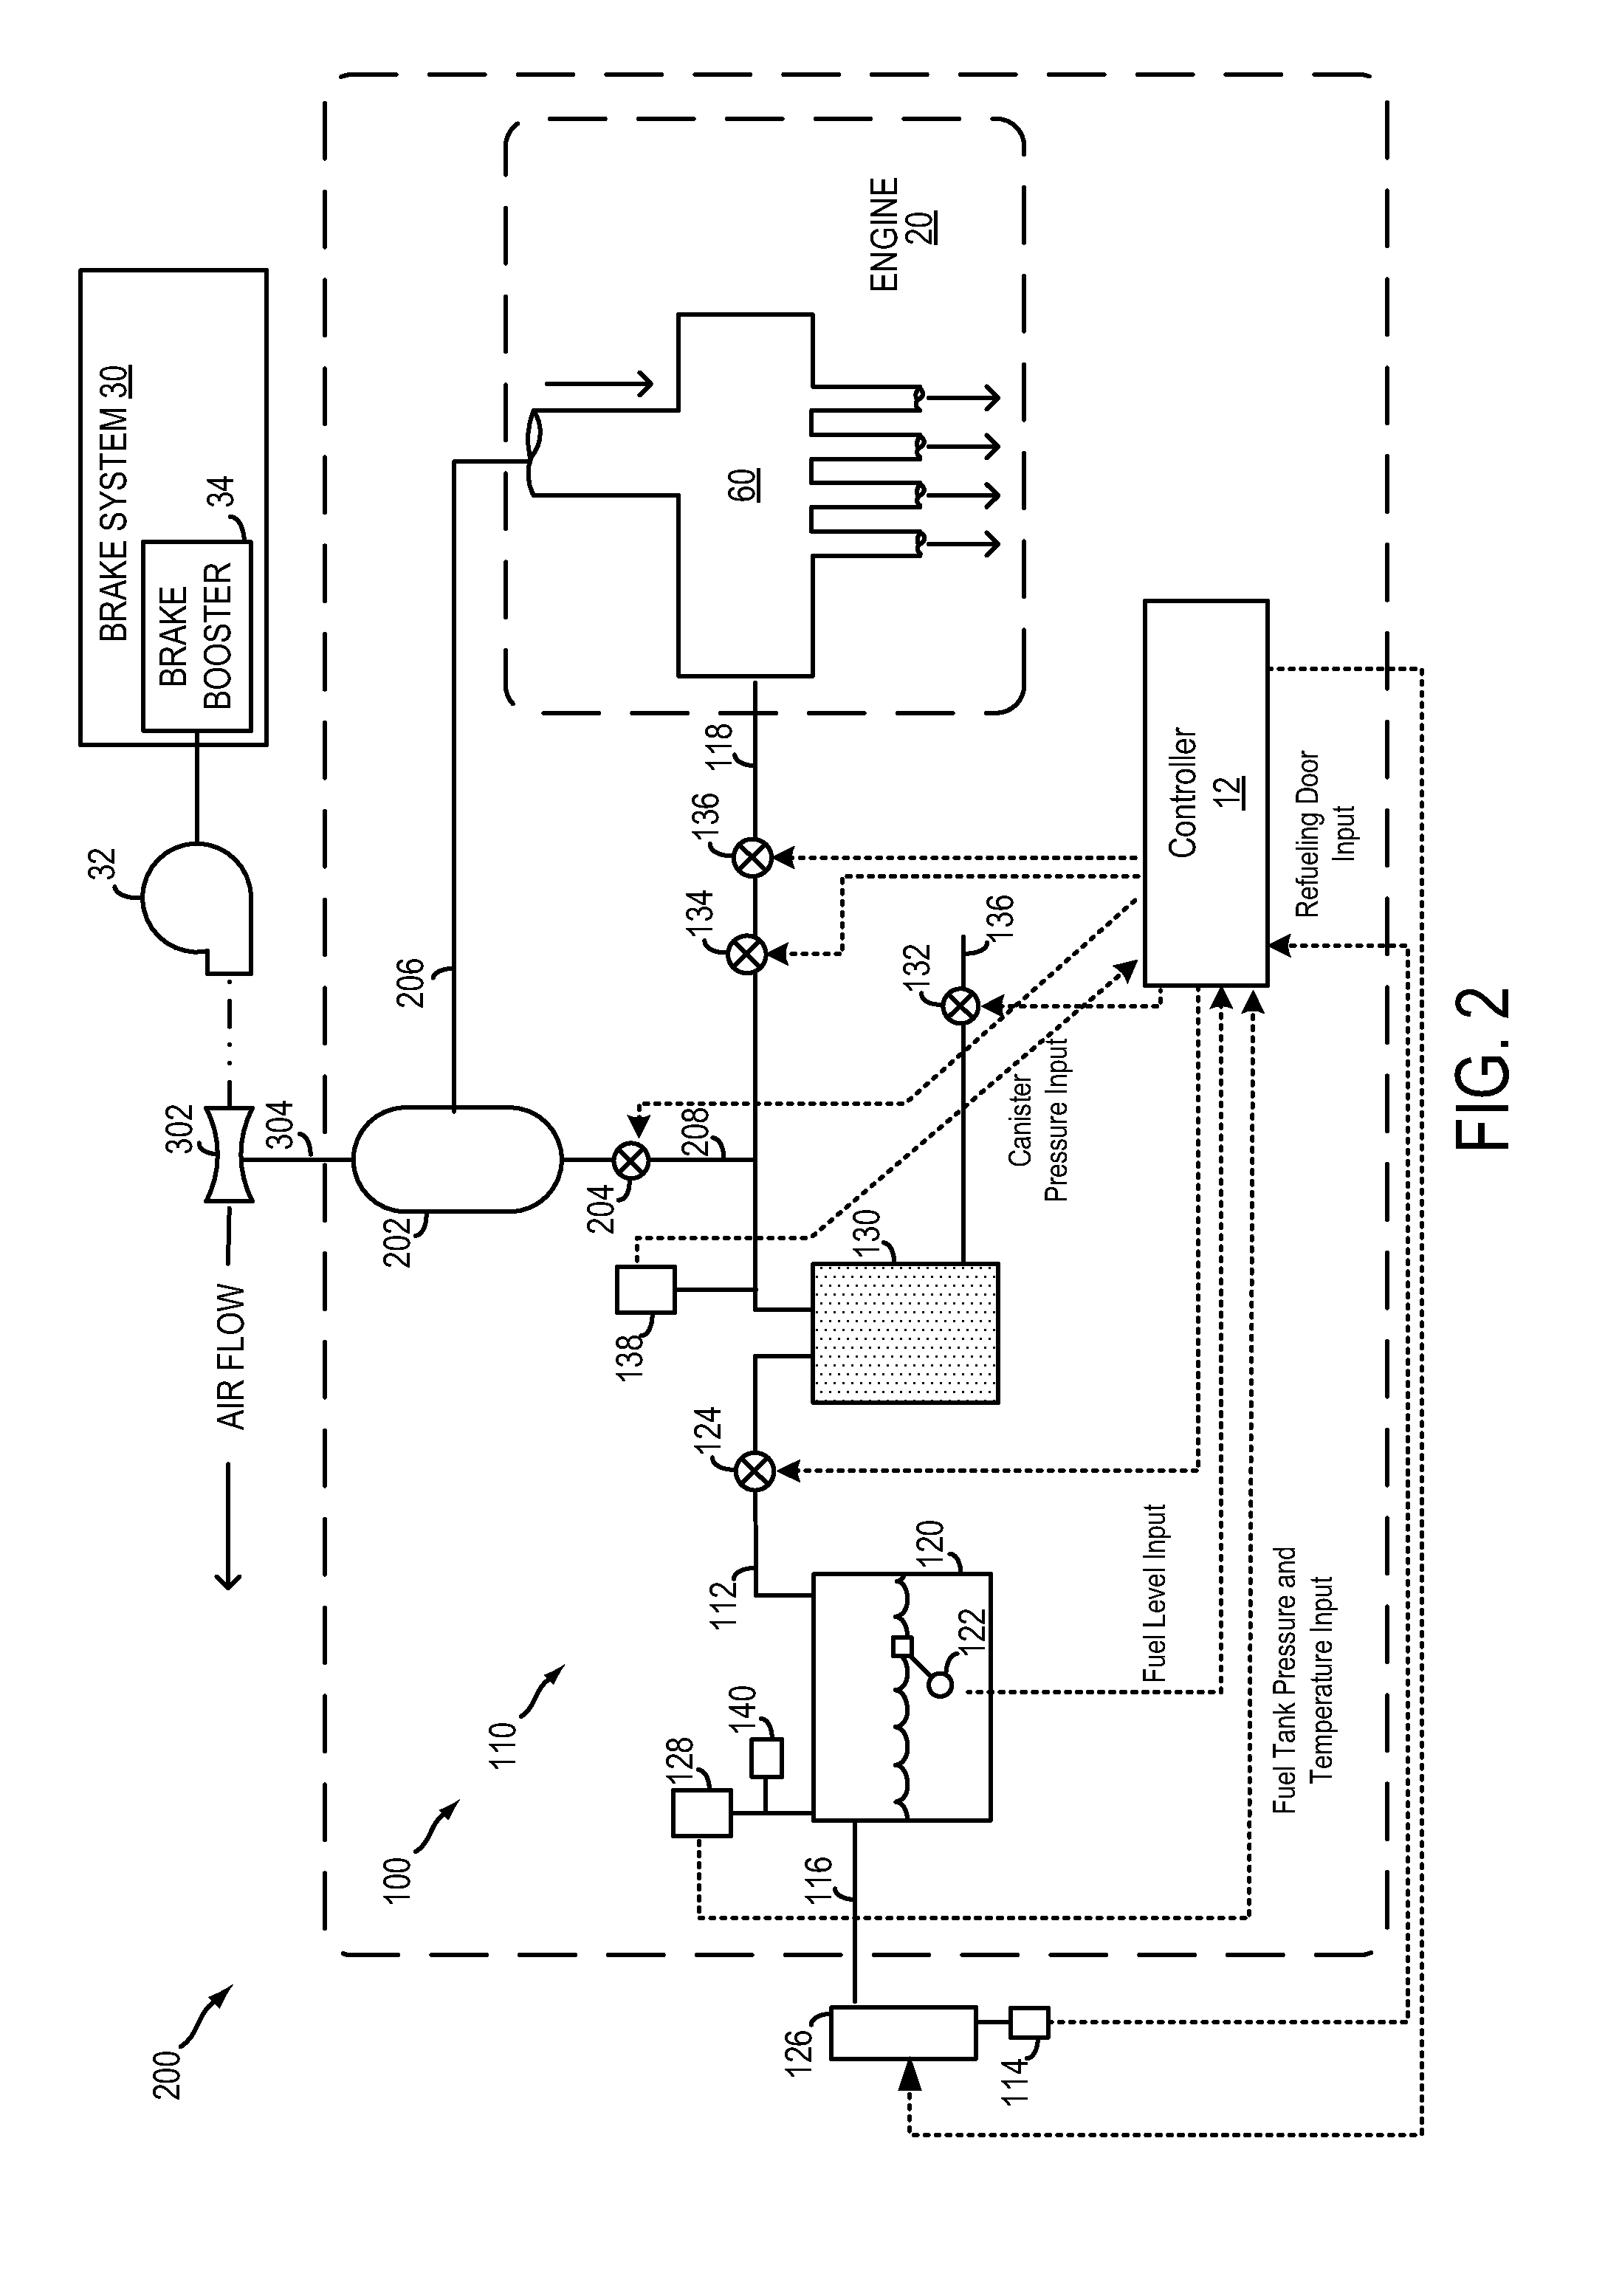 Method and system for fuel vapor control